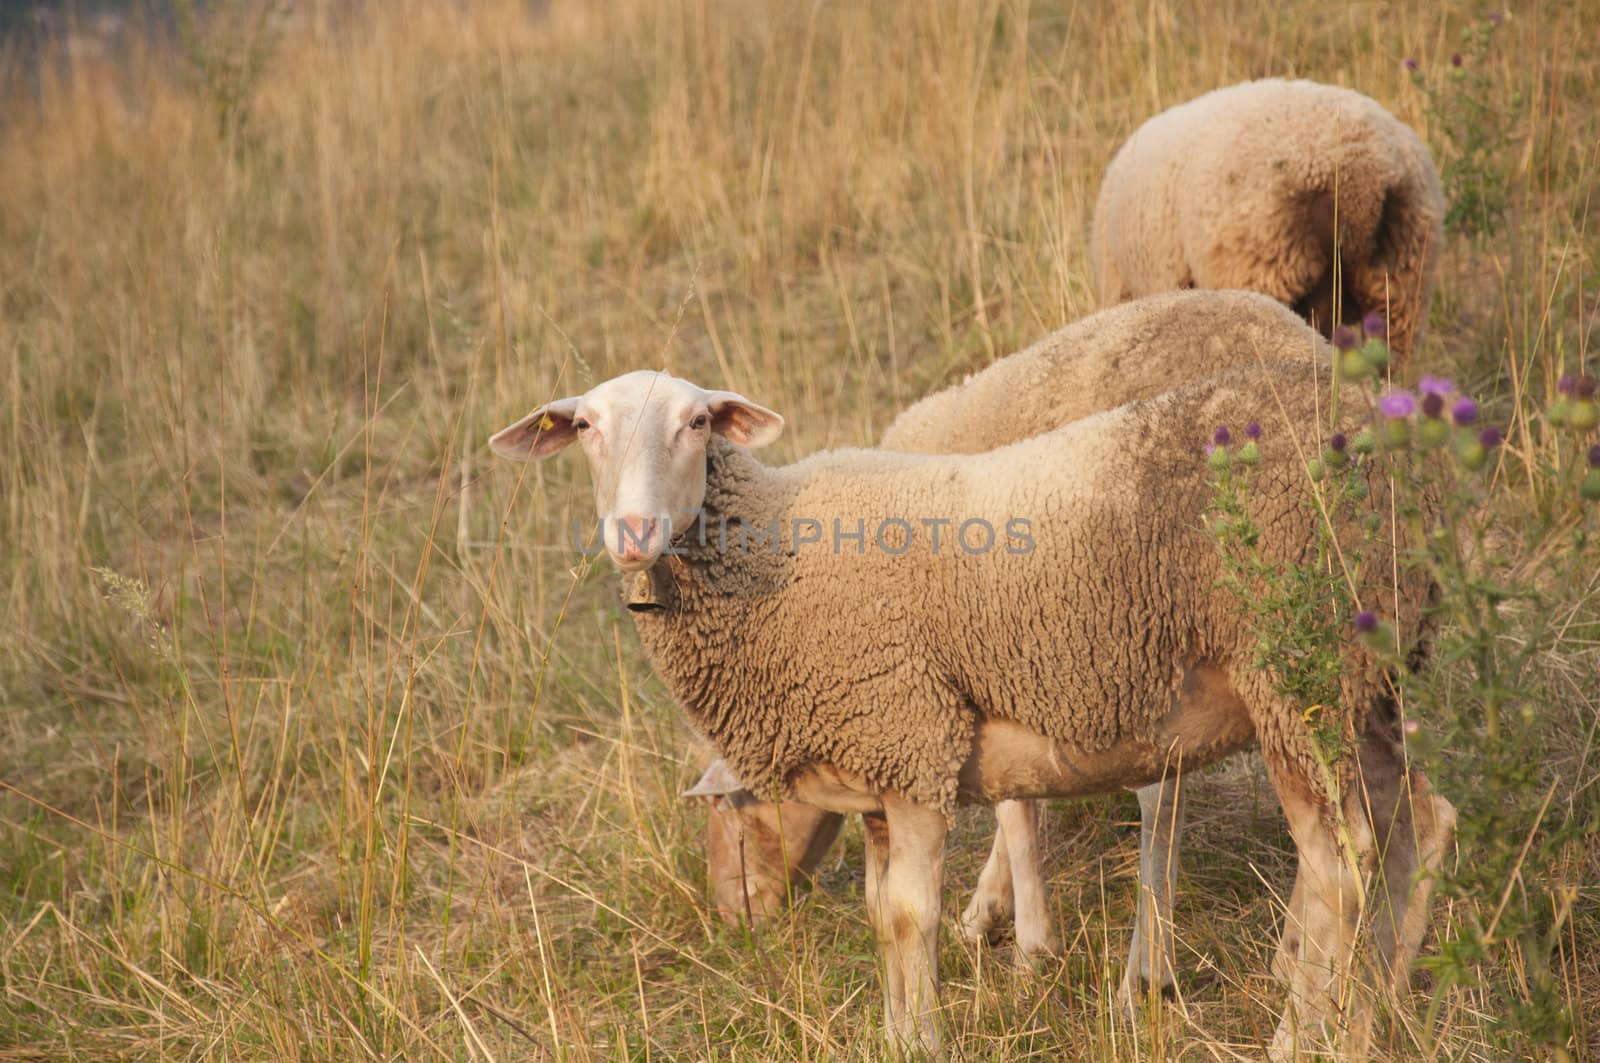 Beautiful White Sheep with Ear Chip in Switzerland at Sunset by kdreams02